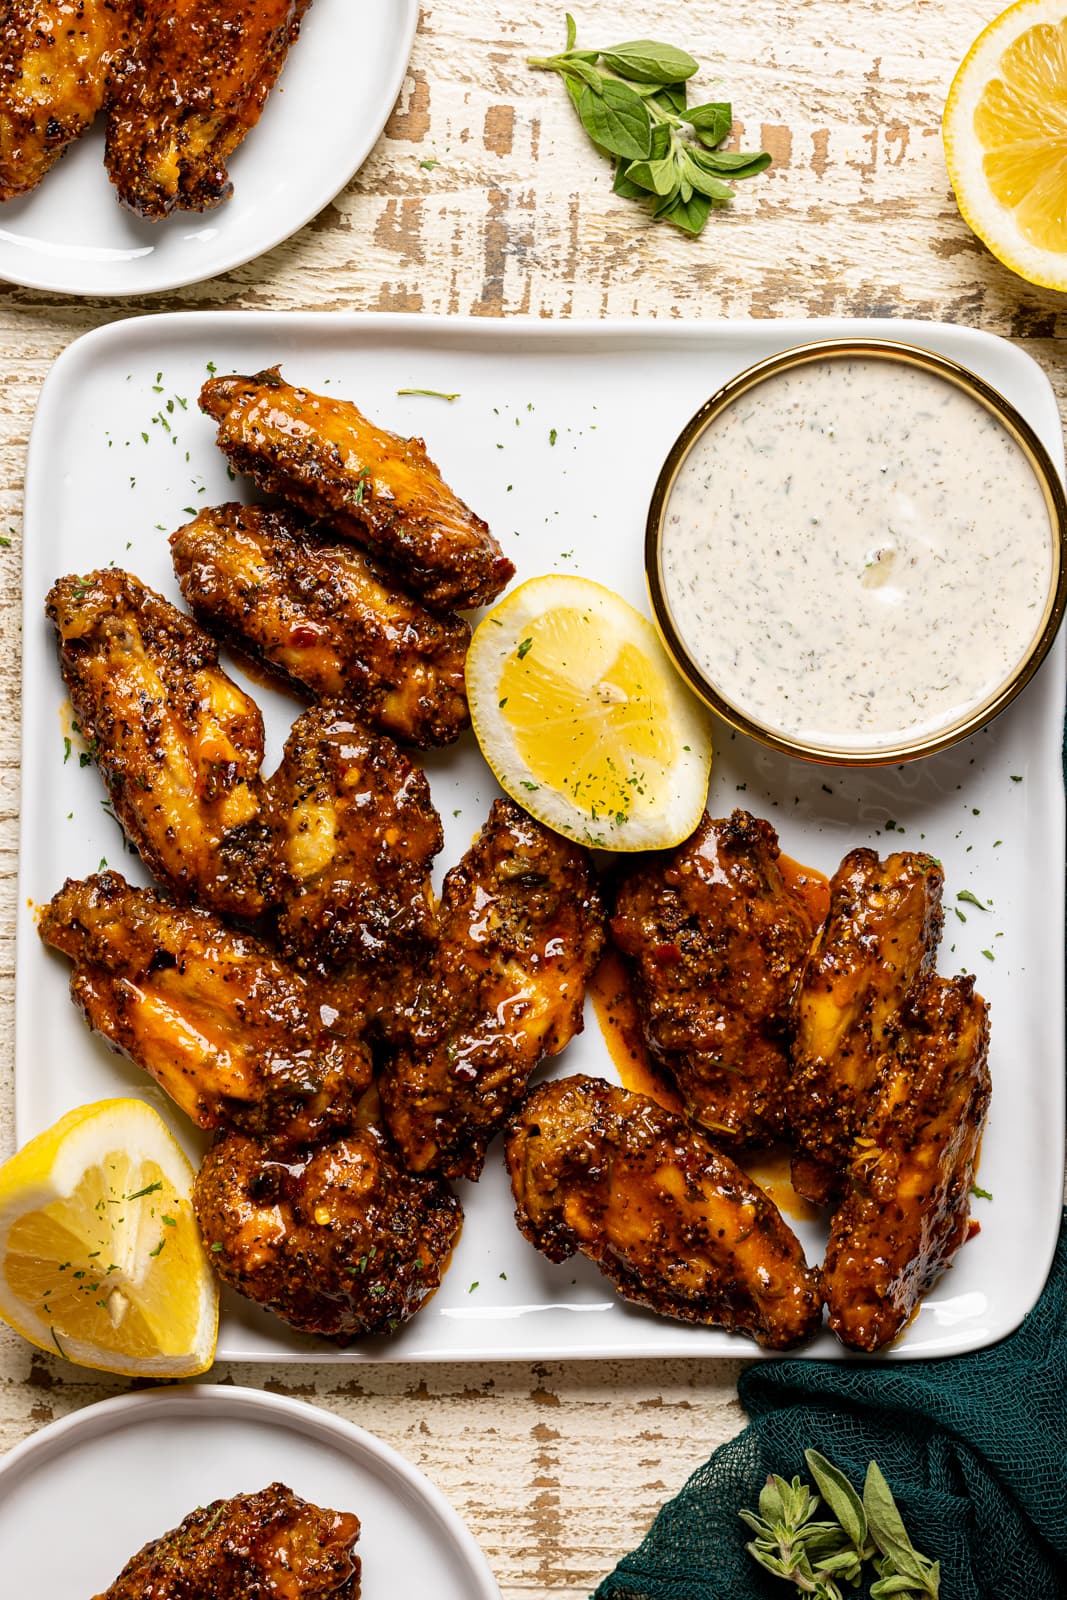 Chicken wings on a white plater with lemon slices, dip, and plates of wings on a white wood table.